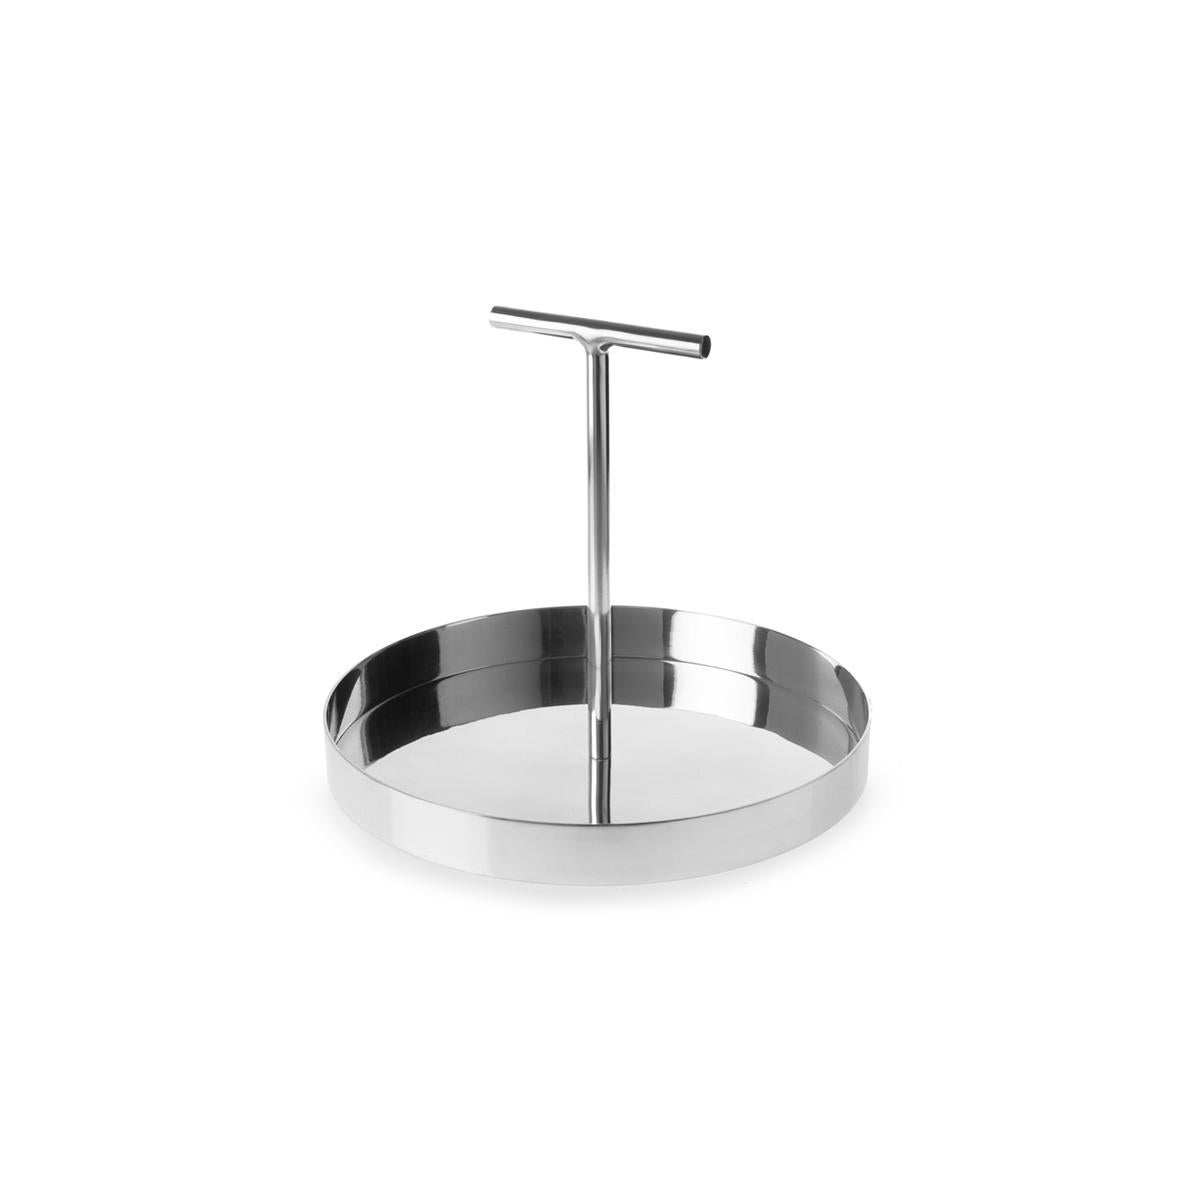 Phil is a family of metallic trays designed by Indian designer Bojou Jain. This model of Phil is conceived in polished aluminium with a circular base. At the centre of the base rises a high T-shape handle a non-conventional element that makes this